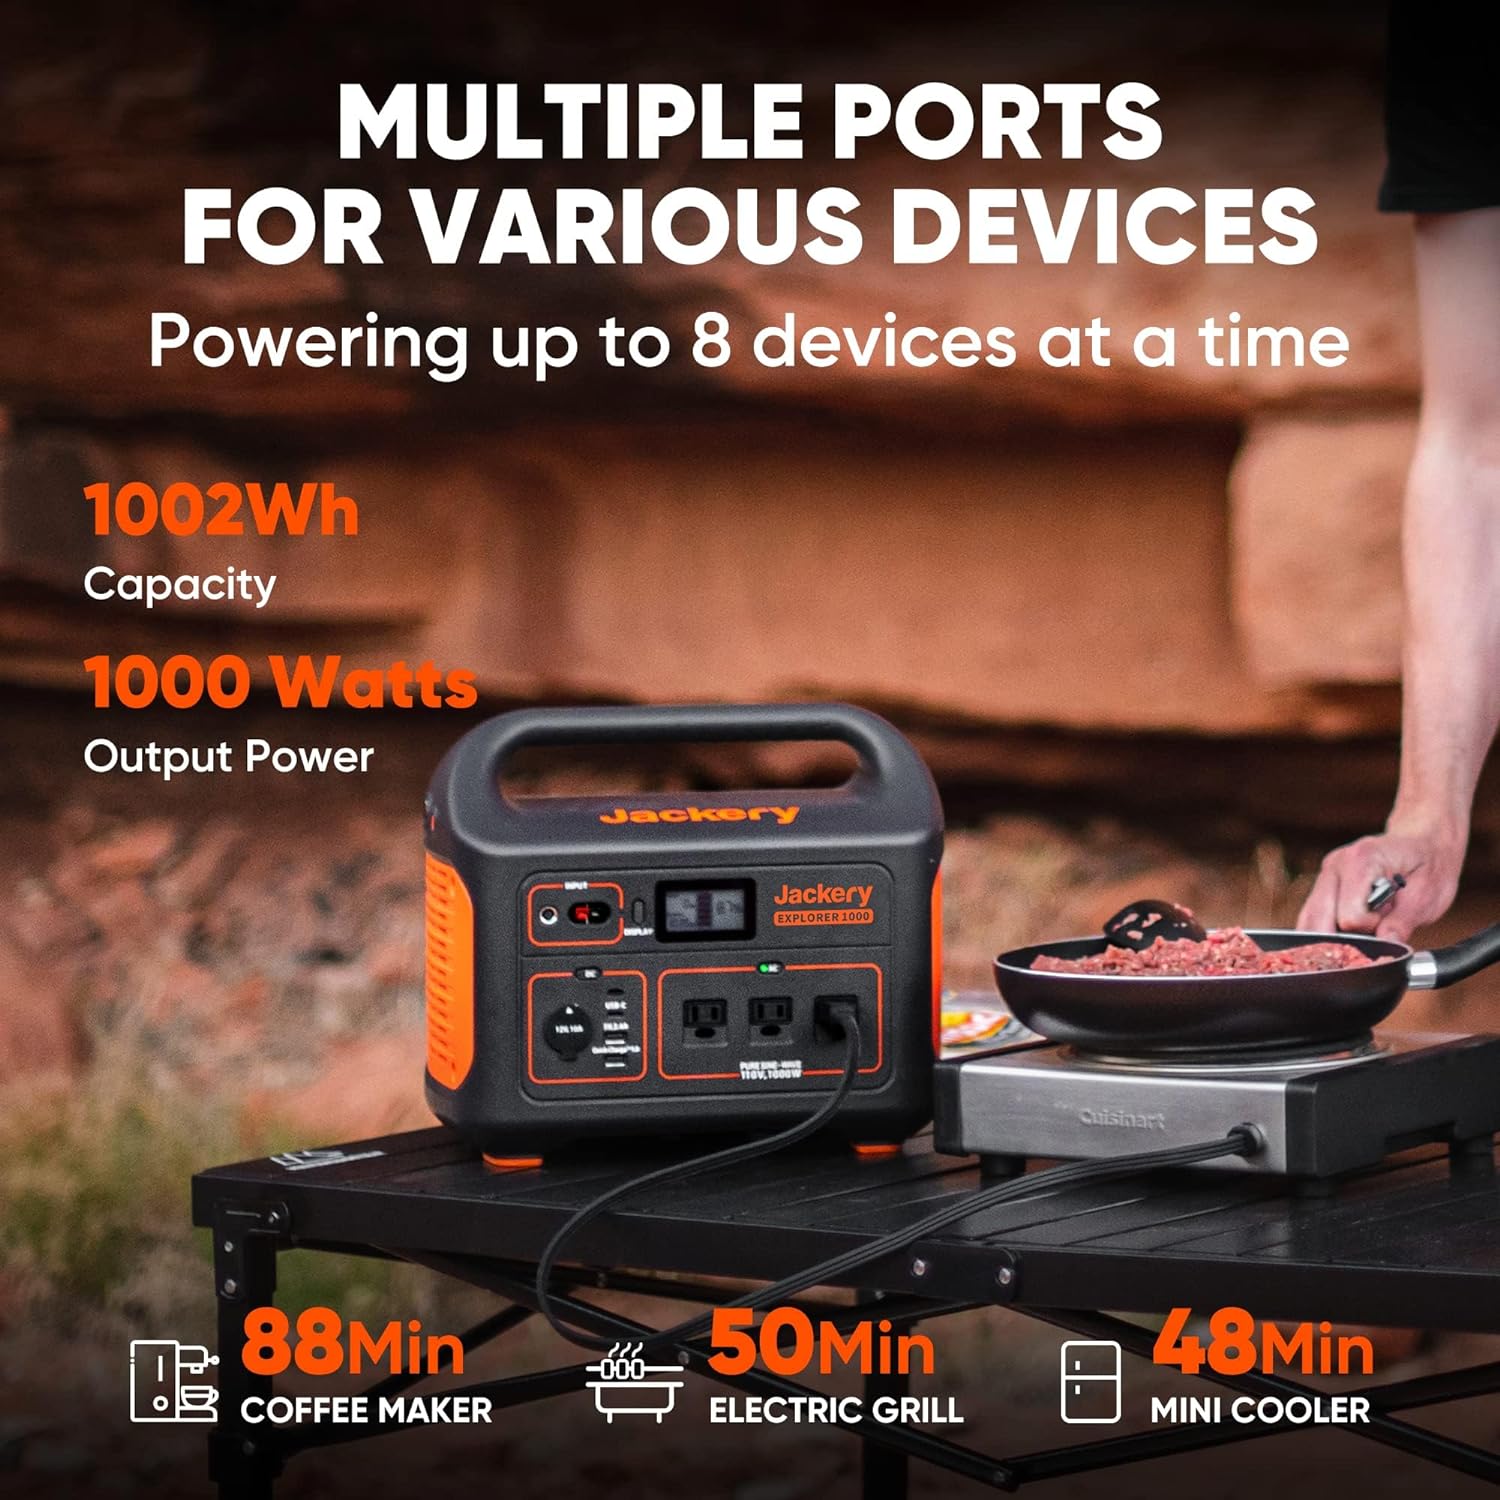 Empower Your Adventures: Jackery Explorer 1000 Portable Power Station Review - Your Ultimate Companion for Reliable Energy Anywhere